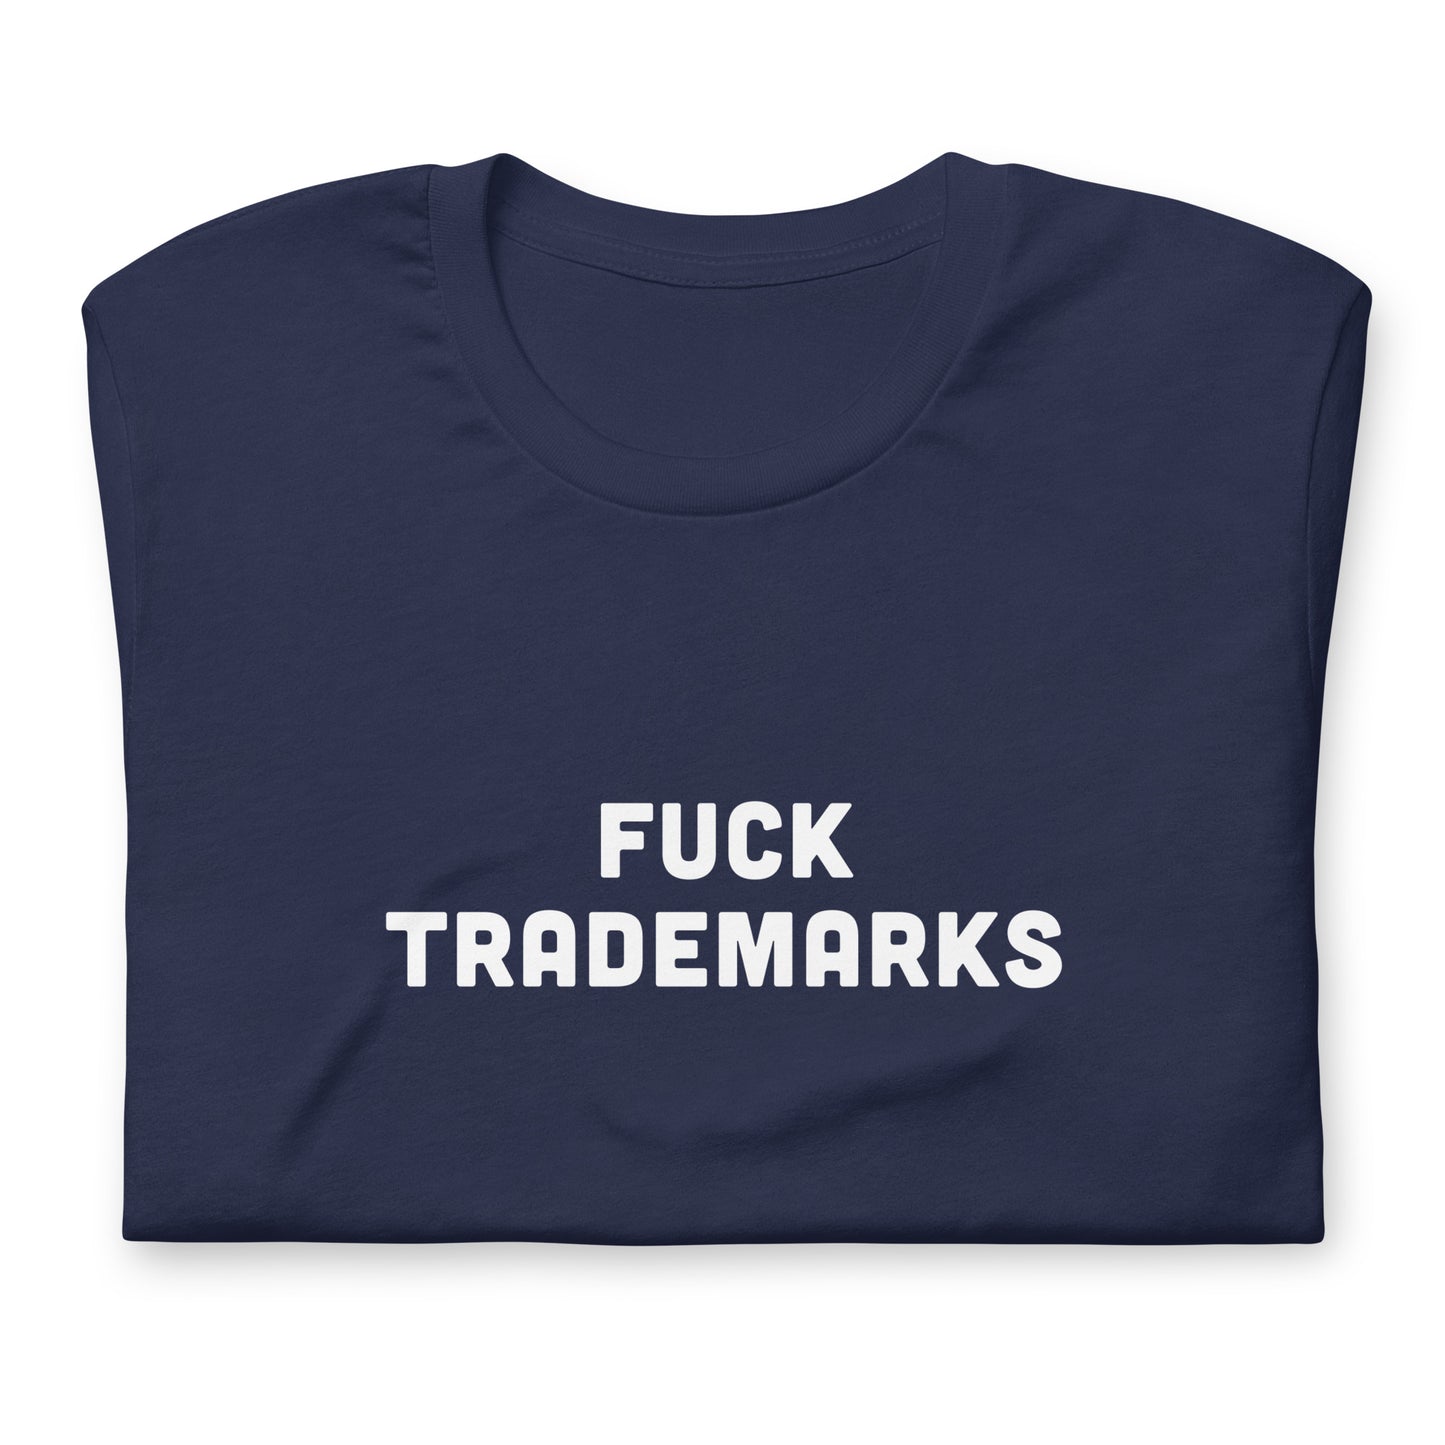 Fuck Trademarks T-Shirt Size S Color Black